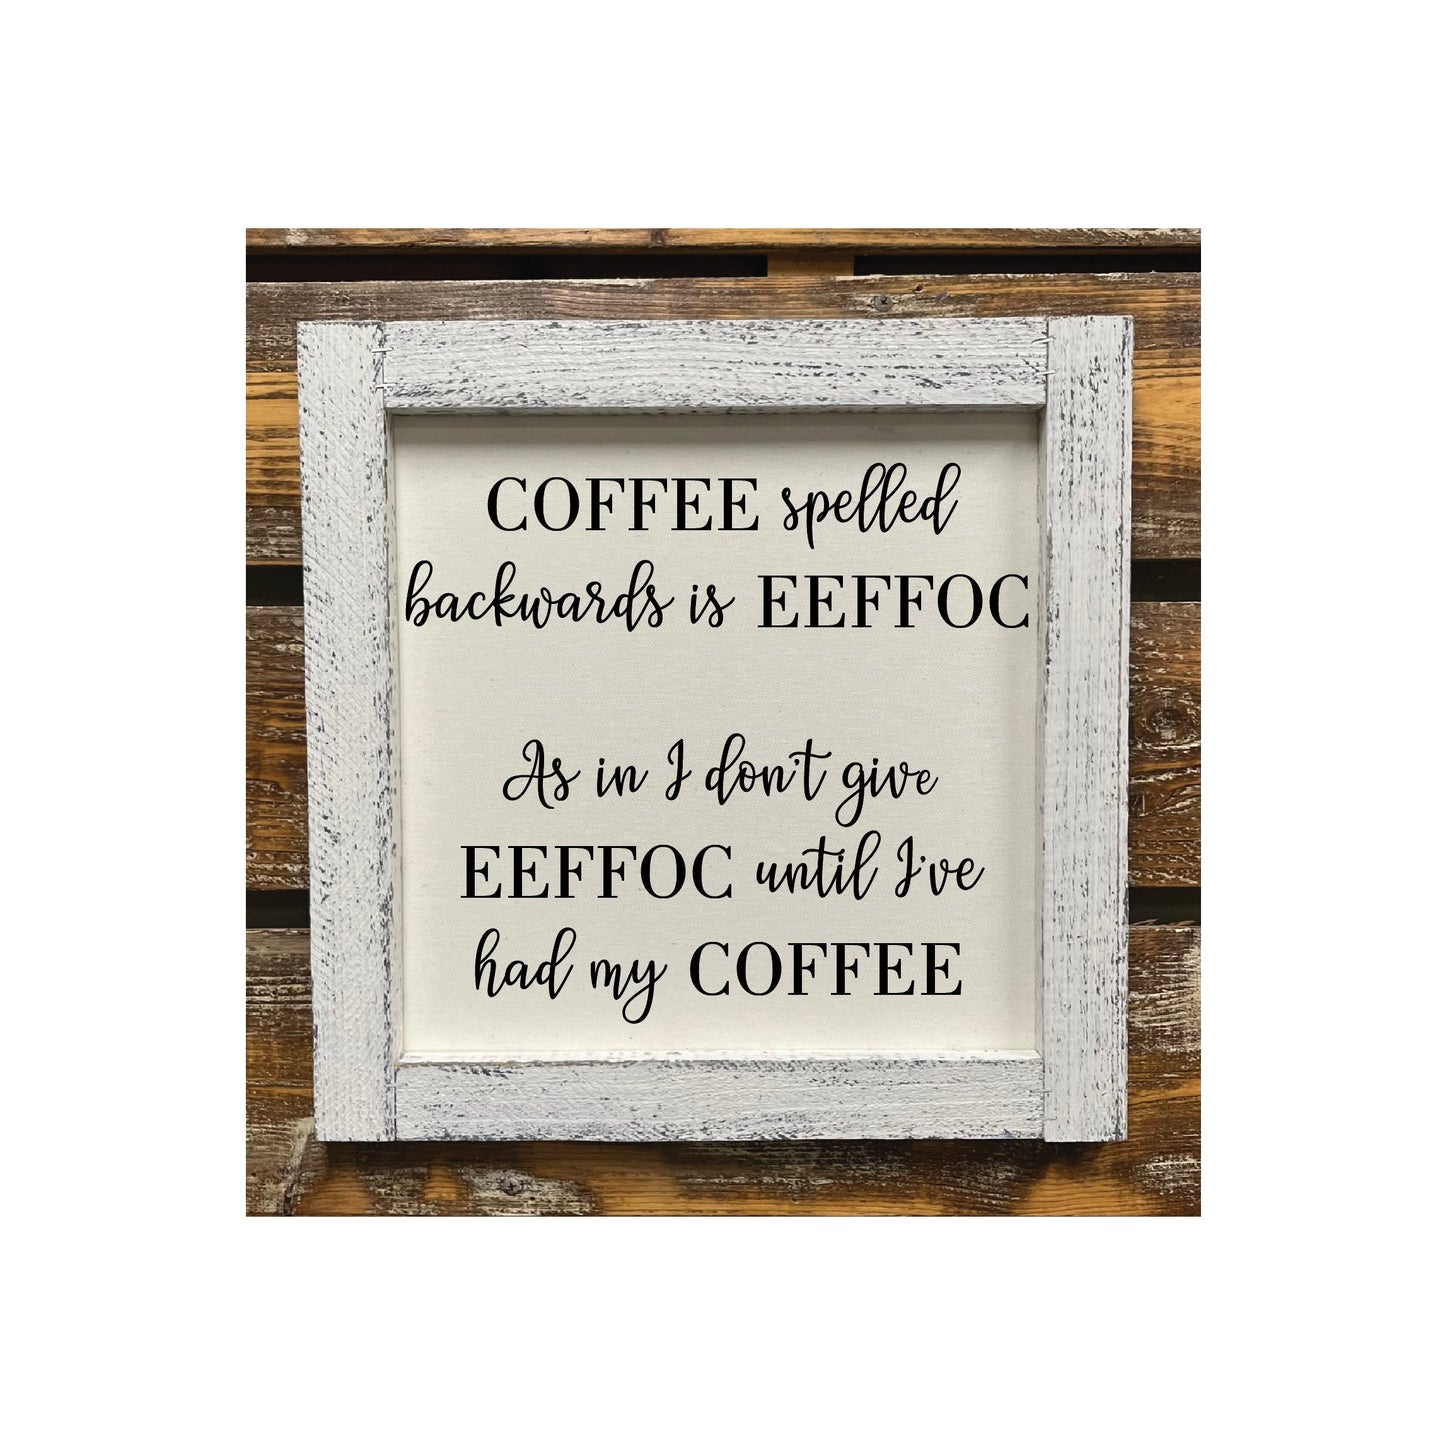 I Don't Give a EEFFOC until COFFEE